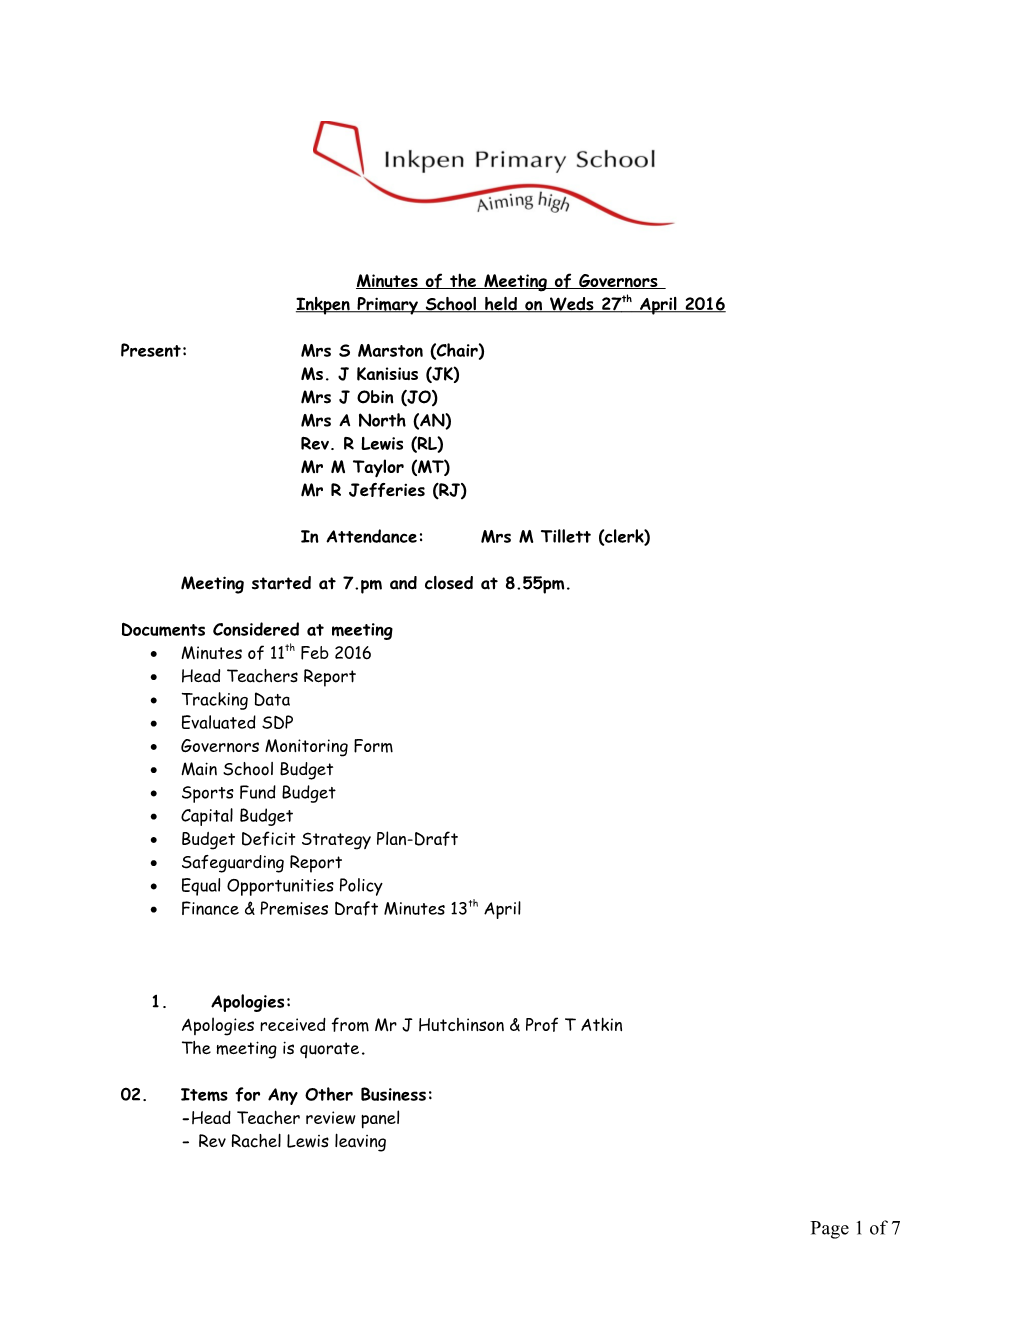 Minutes of the Meeting of the Governors of Inkpen Primary School Held on Thursday 01 February